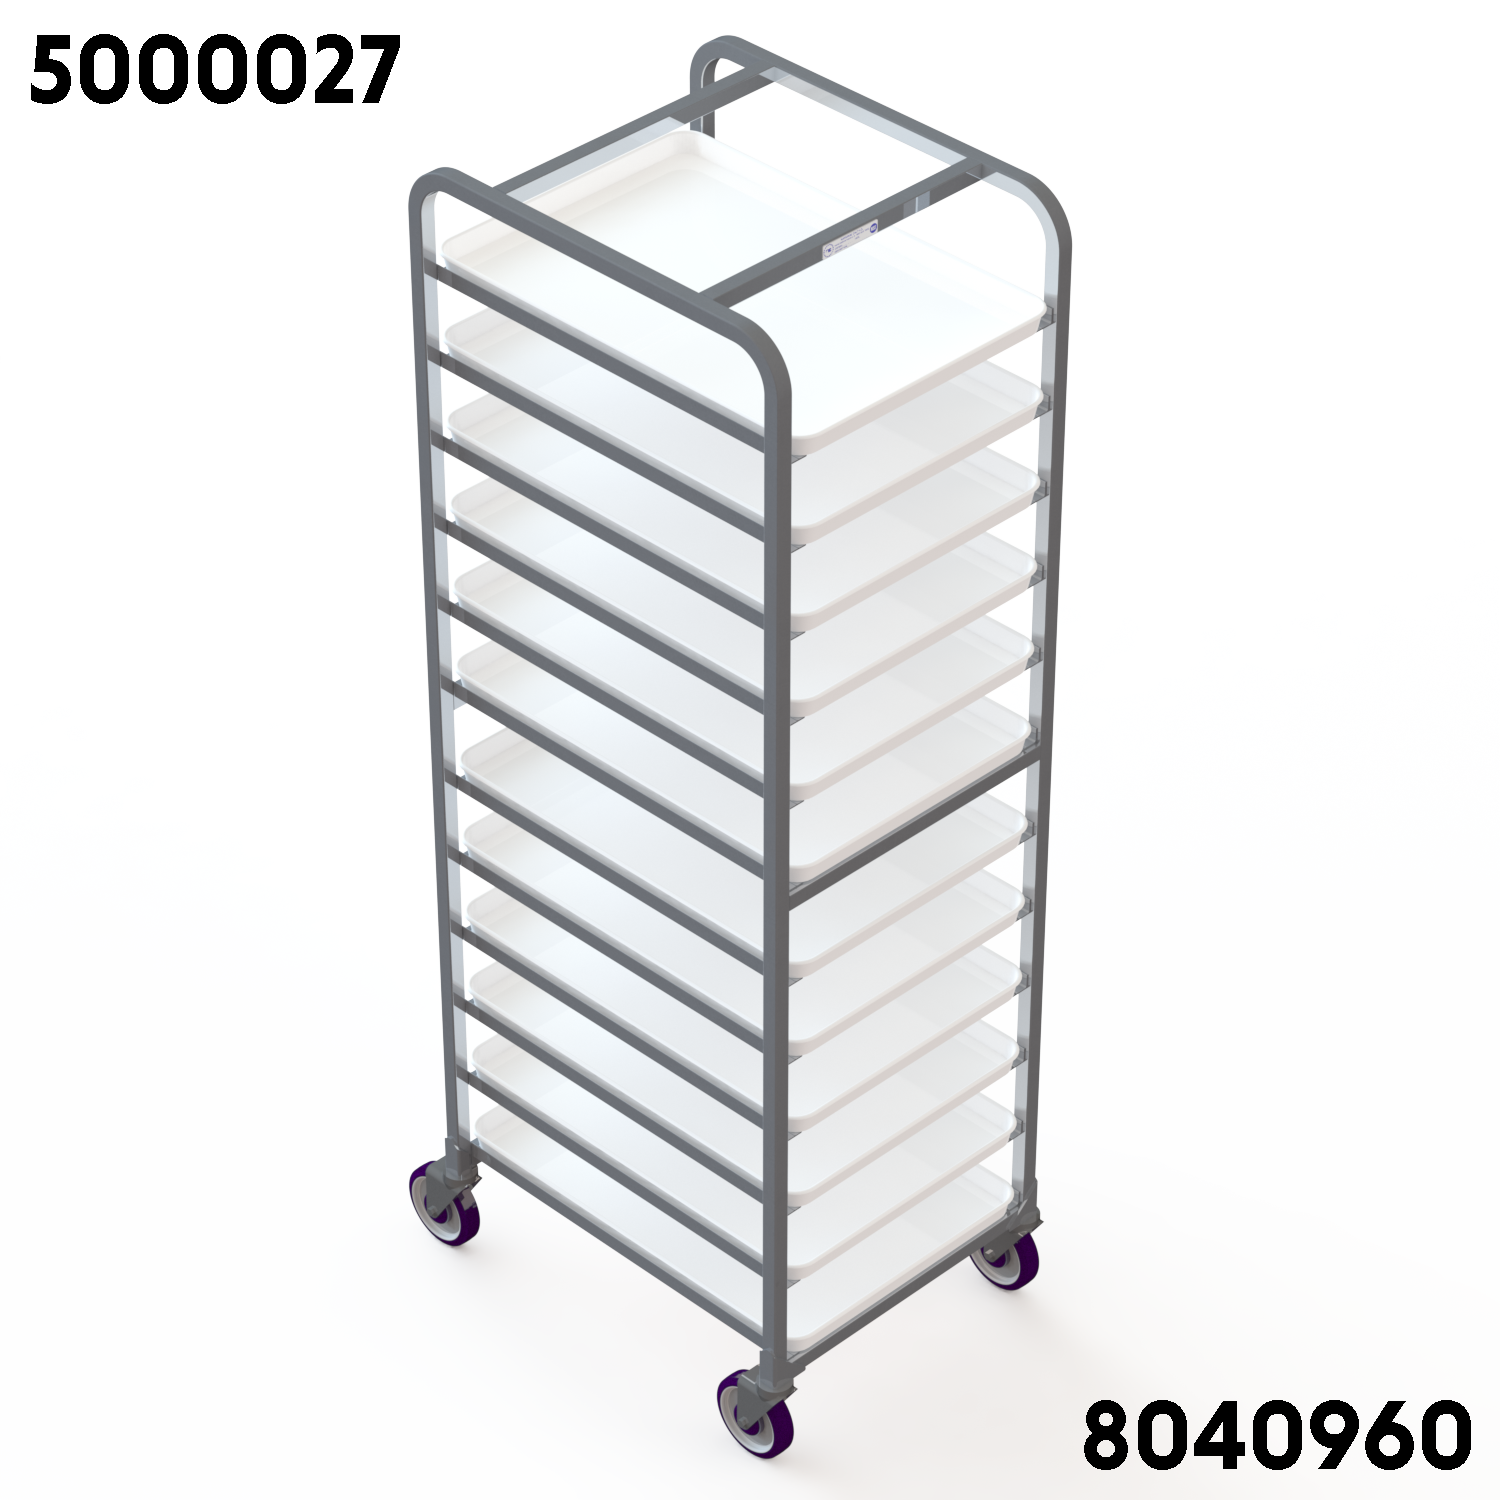 Aluminum End Loading Pan Racks NSF certification bakery cart kitchen cart restaurant cart grocery cart industrial cart nesting picking cart NSF cart NSF rack NSF approved NSF certified National Sanitation Foundation tray shelf Distribution Cart picking cart tray shelf picking cart, picking cart, ecom cart, ecommerce cart, ecommerce picking cart, picking cart, INDUSTRIAL CARTS, grocery cart grocery picking cart, department store cart, beverage cart NSF approved. This food service cart meets strict standards and procedures imposed by NSF. lug cart meat department, produce department bakery cart bakery rack bakery carts bakery racks meat rack meat cart sushi cart salad bar cart deli cart stream table cart buffet cart